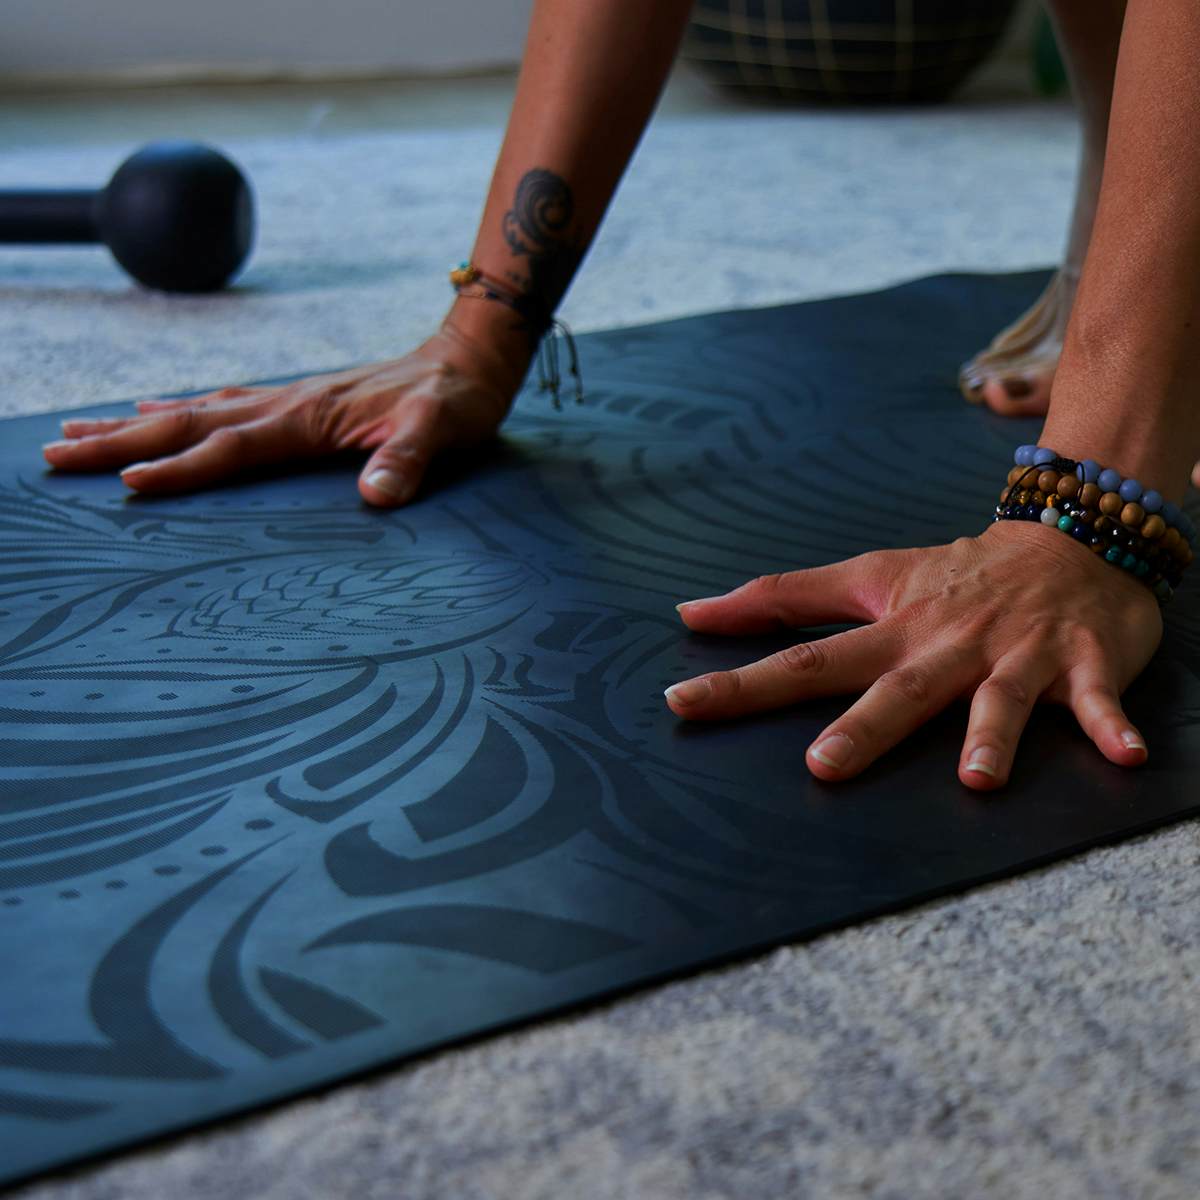 YOGA mats made of natural materials, The best yoga mats in one place - Yoga  Design Lab mats and accessories for yoga